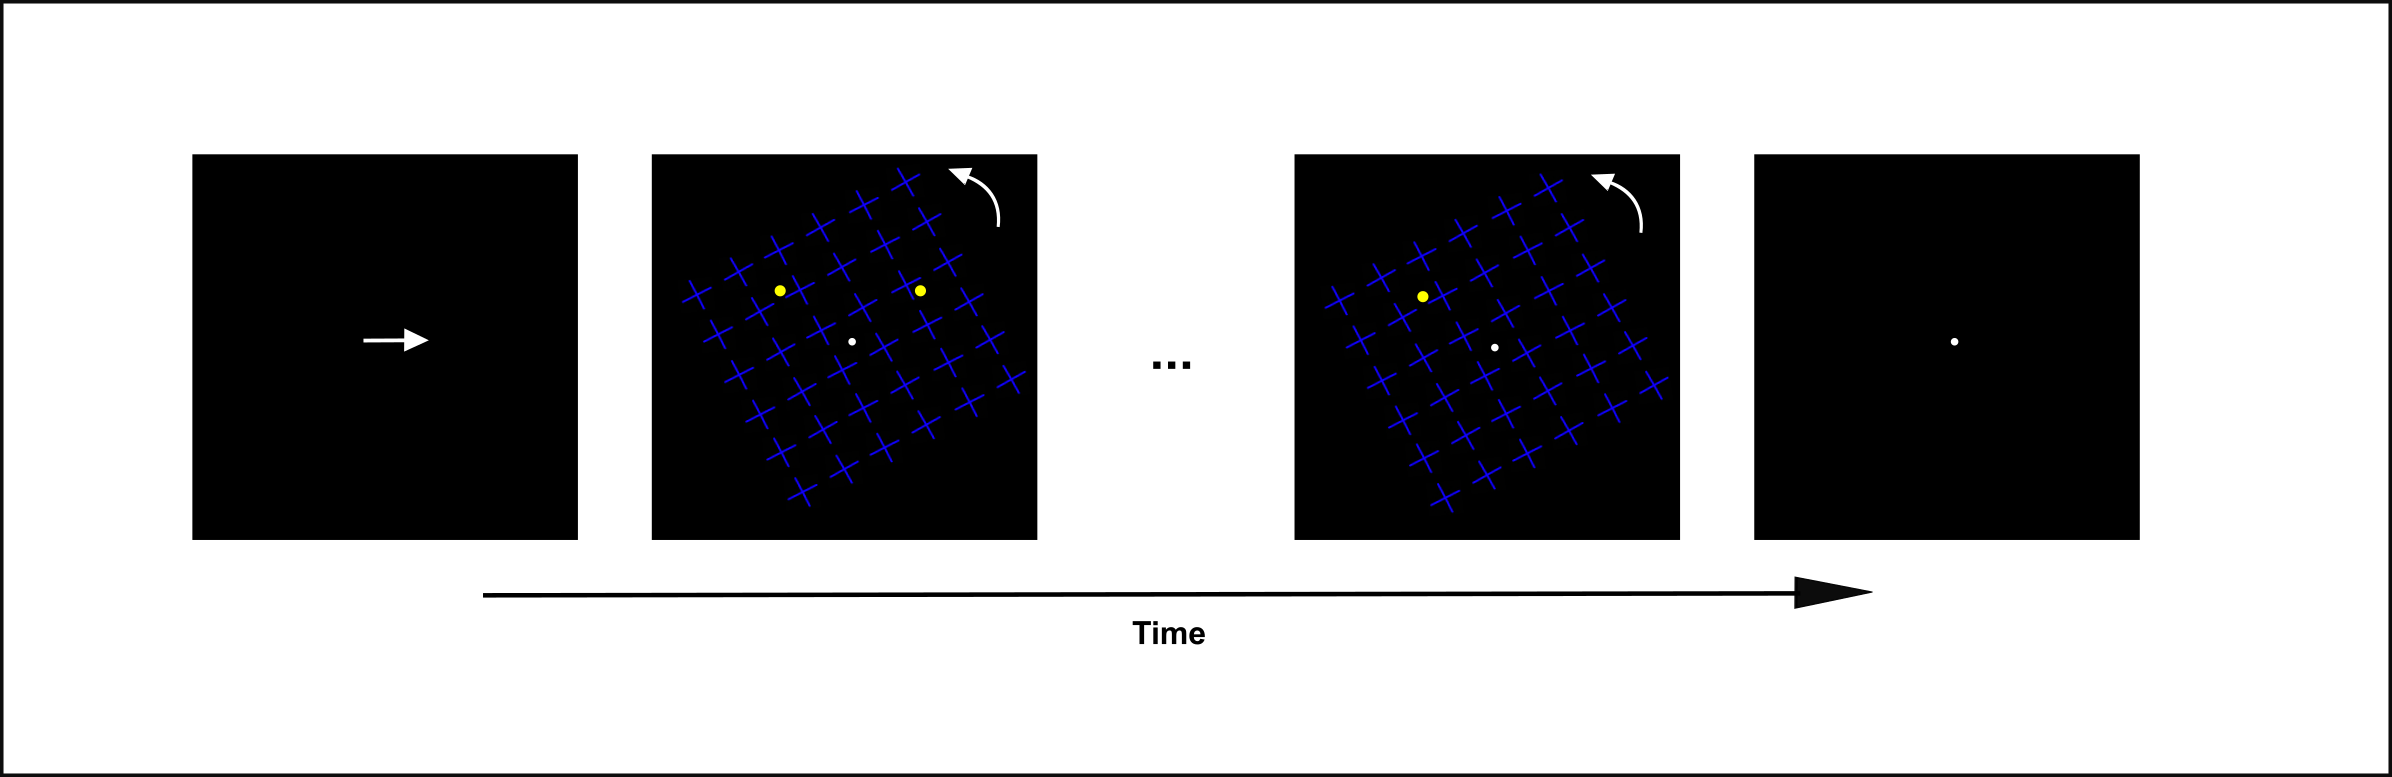 Testing attentional modulations of motion-induced blindness. A standard trial in Schölvinck and Rees’ study started with an arrow cueing attention to the left or the right. Then, two yellow dots and a grid of rotating blue crosses appeared. Participants must maintain fixation and press a key when they noted the disappearance of one of the dots. Redrawn from Journal of Vision 9(1), 38, Schölvinck, M. L., and Rees, G., “Attentional influences on the dynamics of motion-induced blindness,” 31-39, Copyright 2009, with permission from Association for Research in Vision and Ophthalmology.